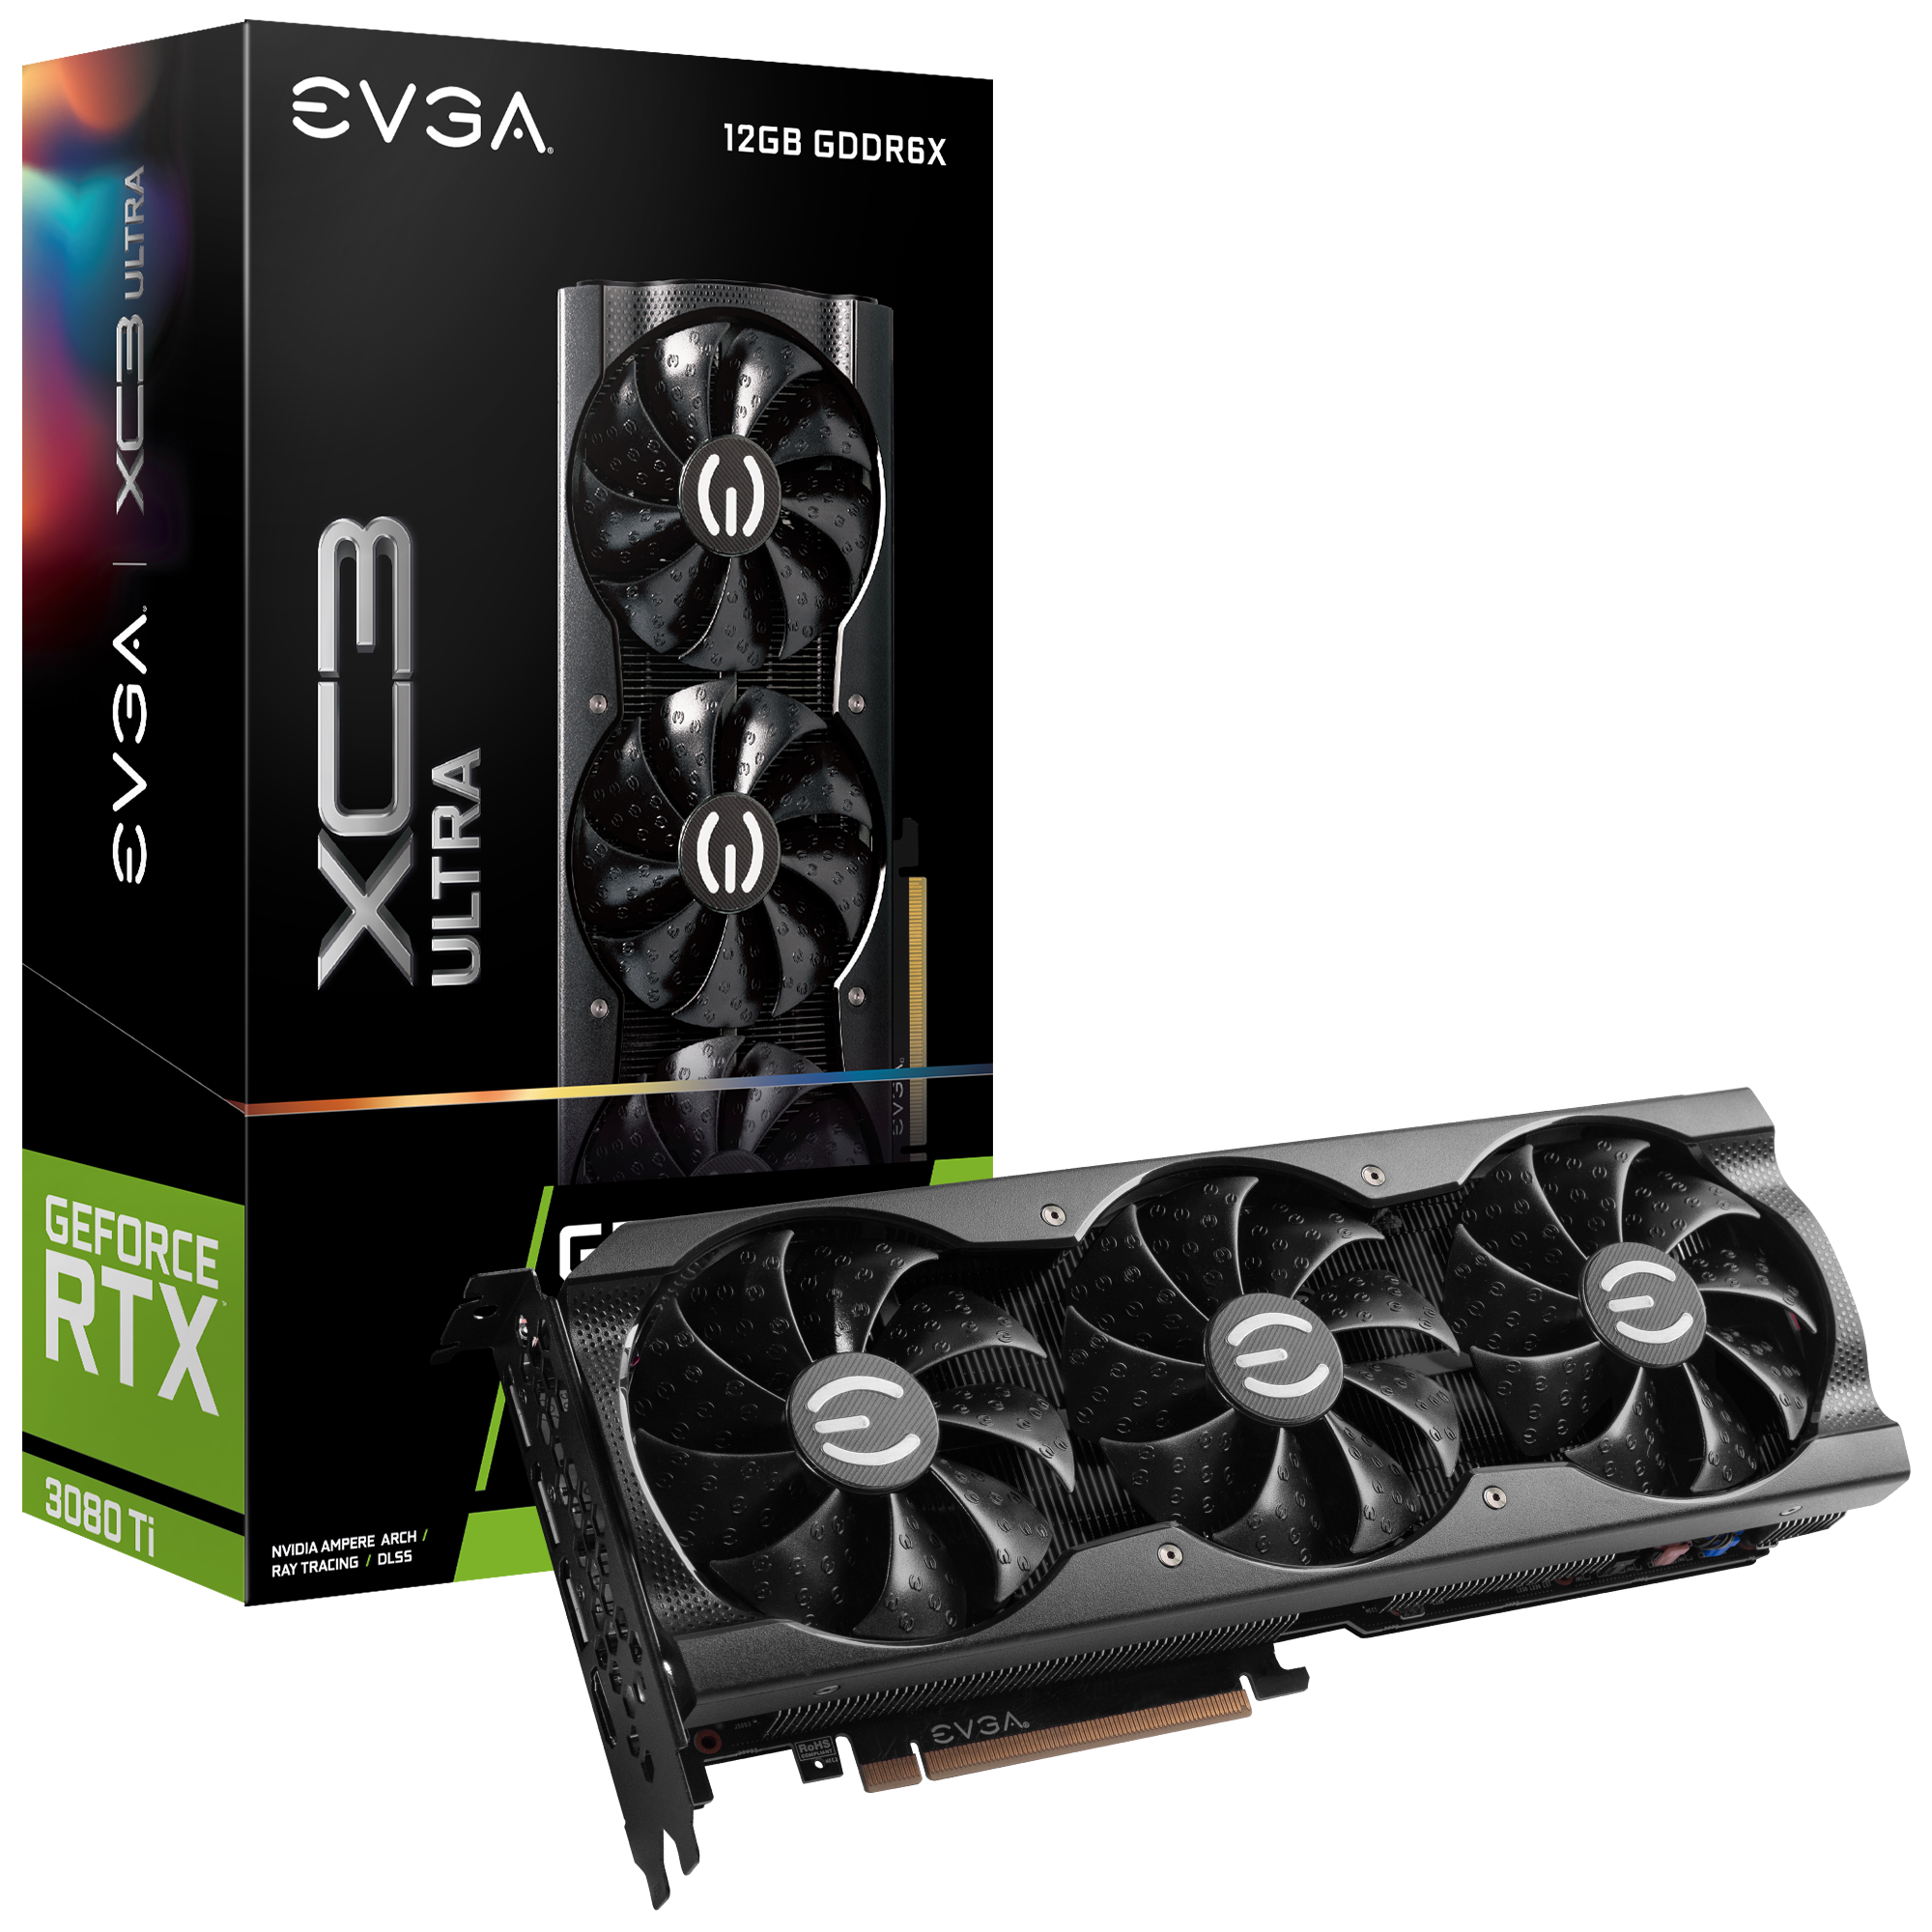 hver for sig Imagination squat EVGA - Products - EVGA GeForce RTX 3080 Ti XC3 ULTRA GAMING,  12G-P5-3955-KR, 12GB GDDR6X, iCX3 Cooling, ARGB LED, Metal Backplate -  12G-P5-3955-KR